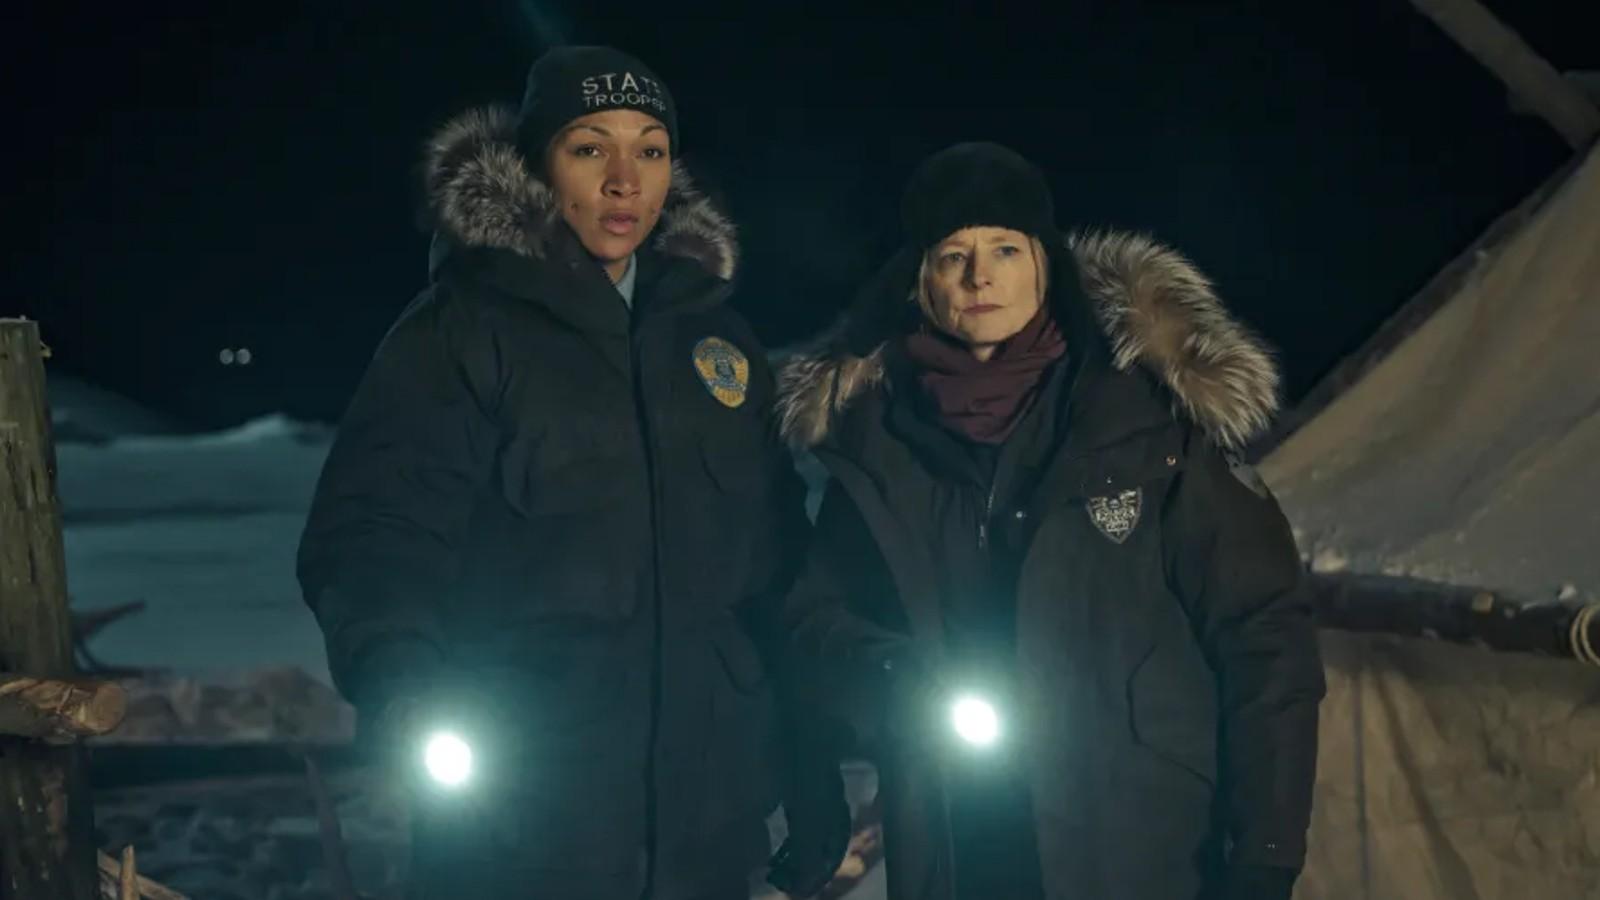 Kali Reis and Jodie Foster as detectives holding torches in True Detective Season 4.